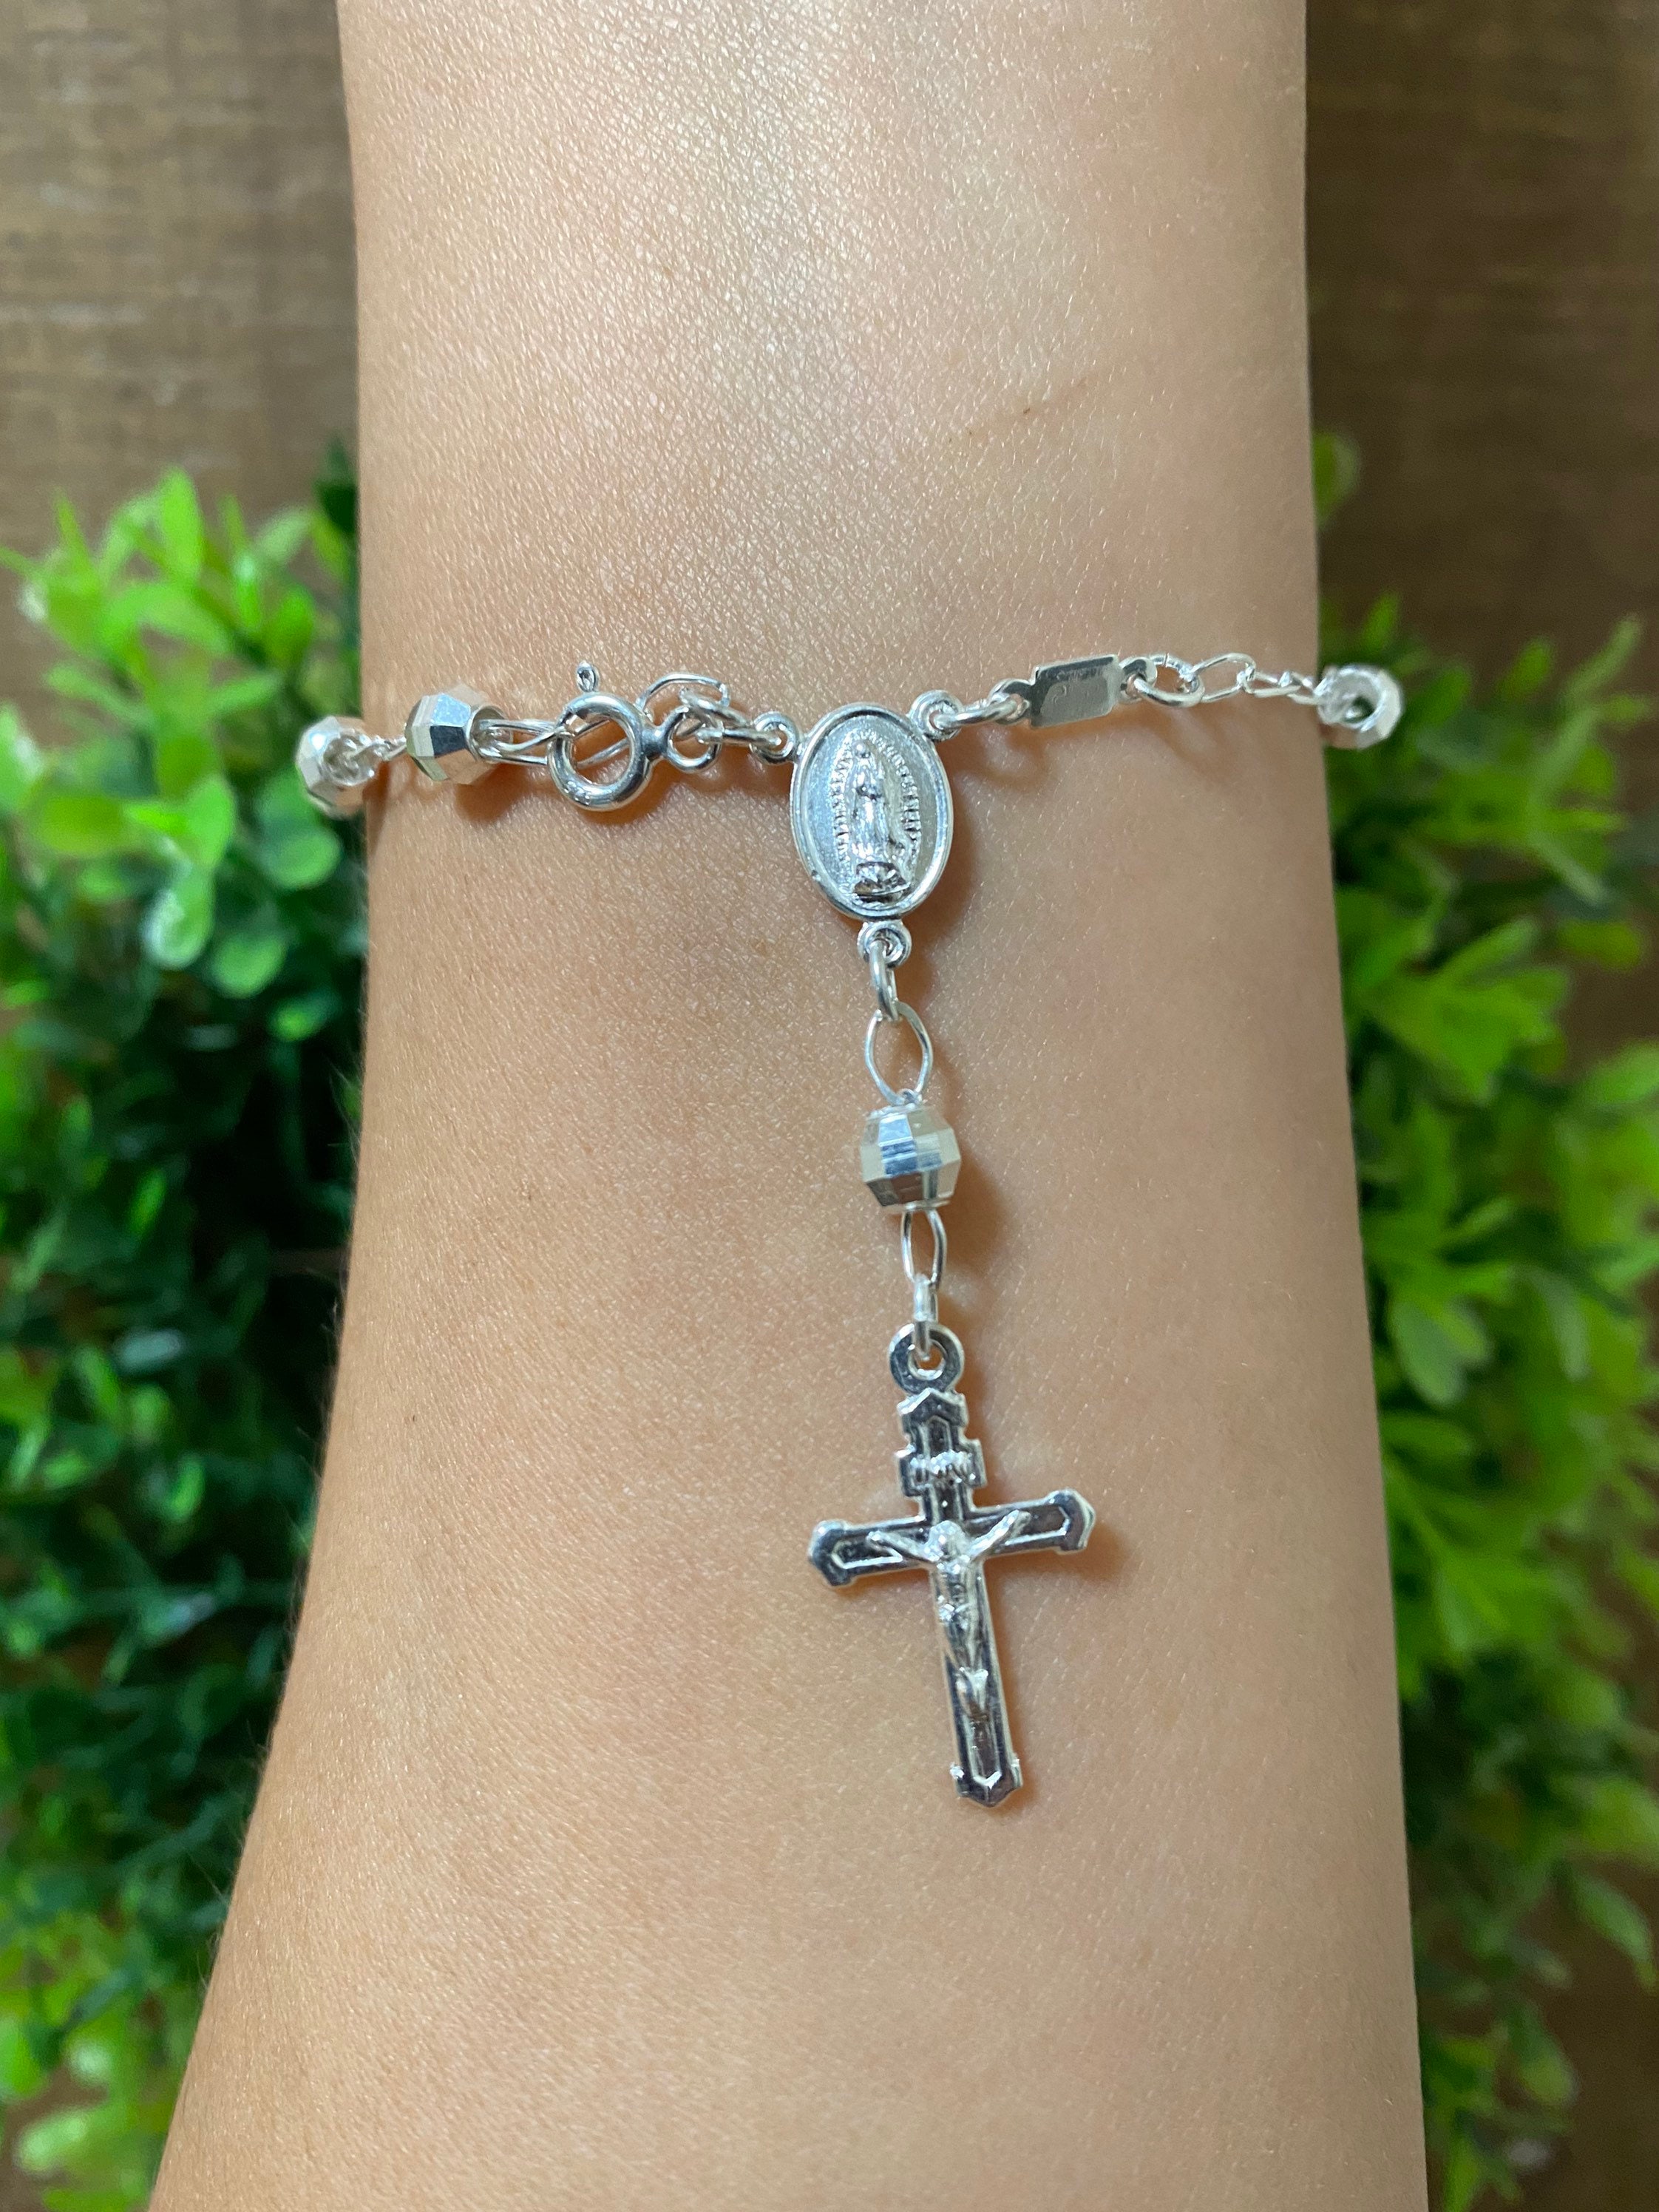 How to Make a Coil Memory Wire Wrap Rosary Bracelet | ehow